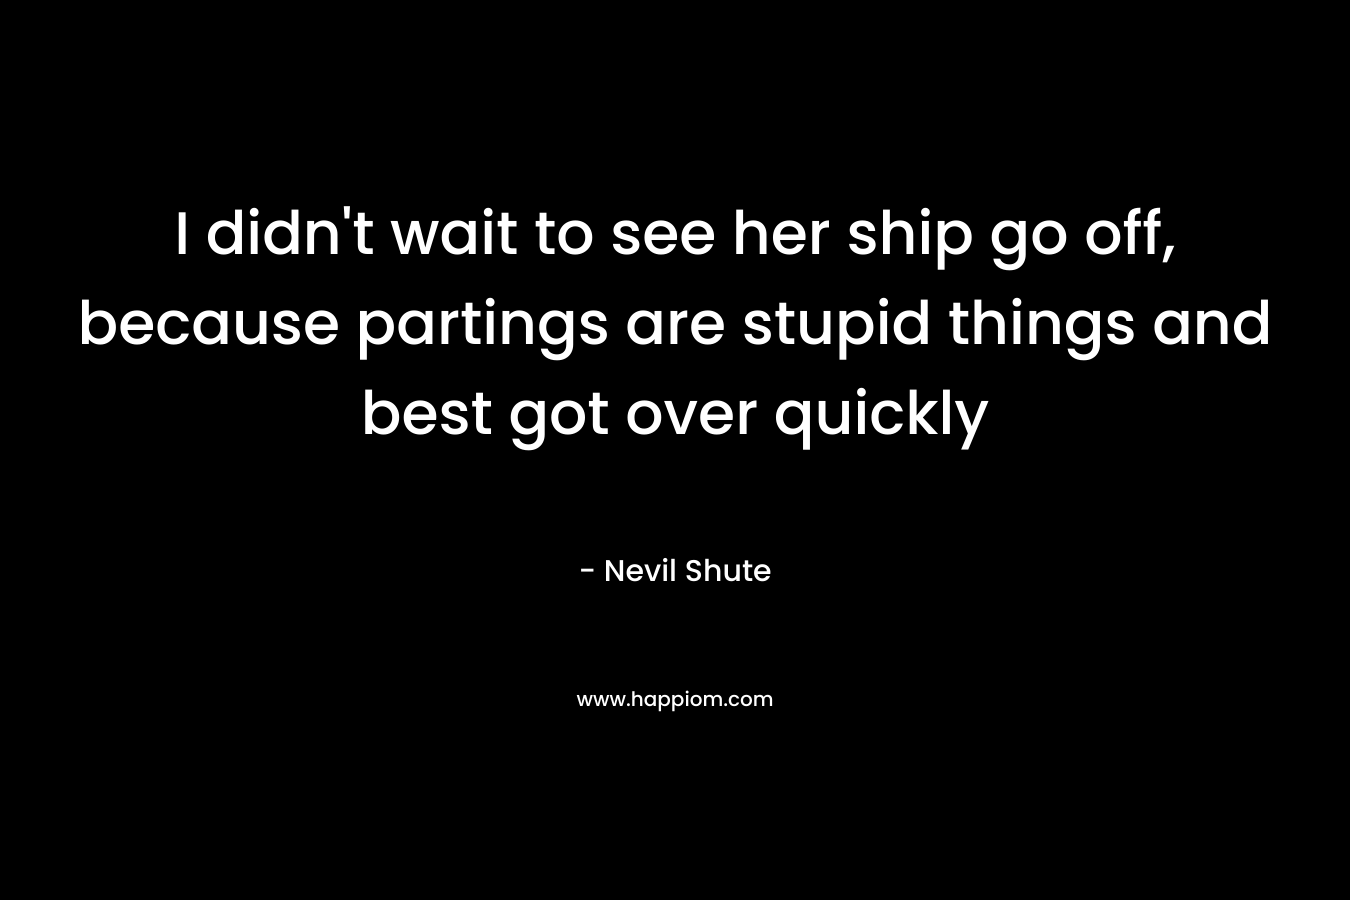 I didn't wait to see her ship go off, because partings are stupid things and best got over quickly